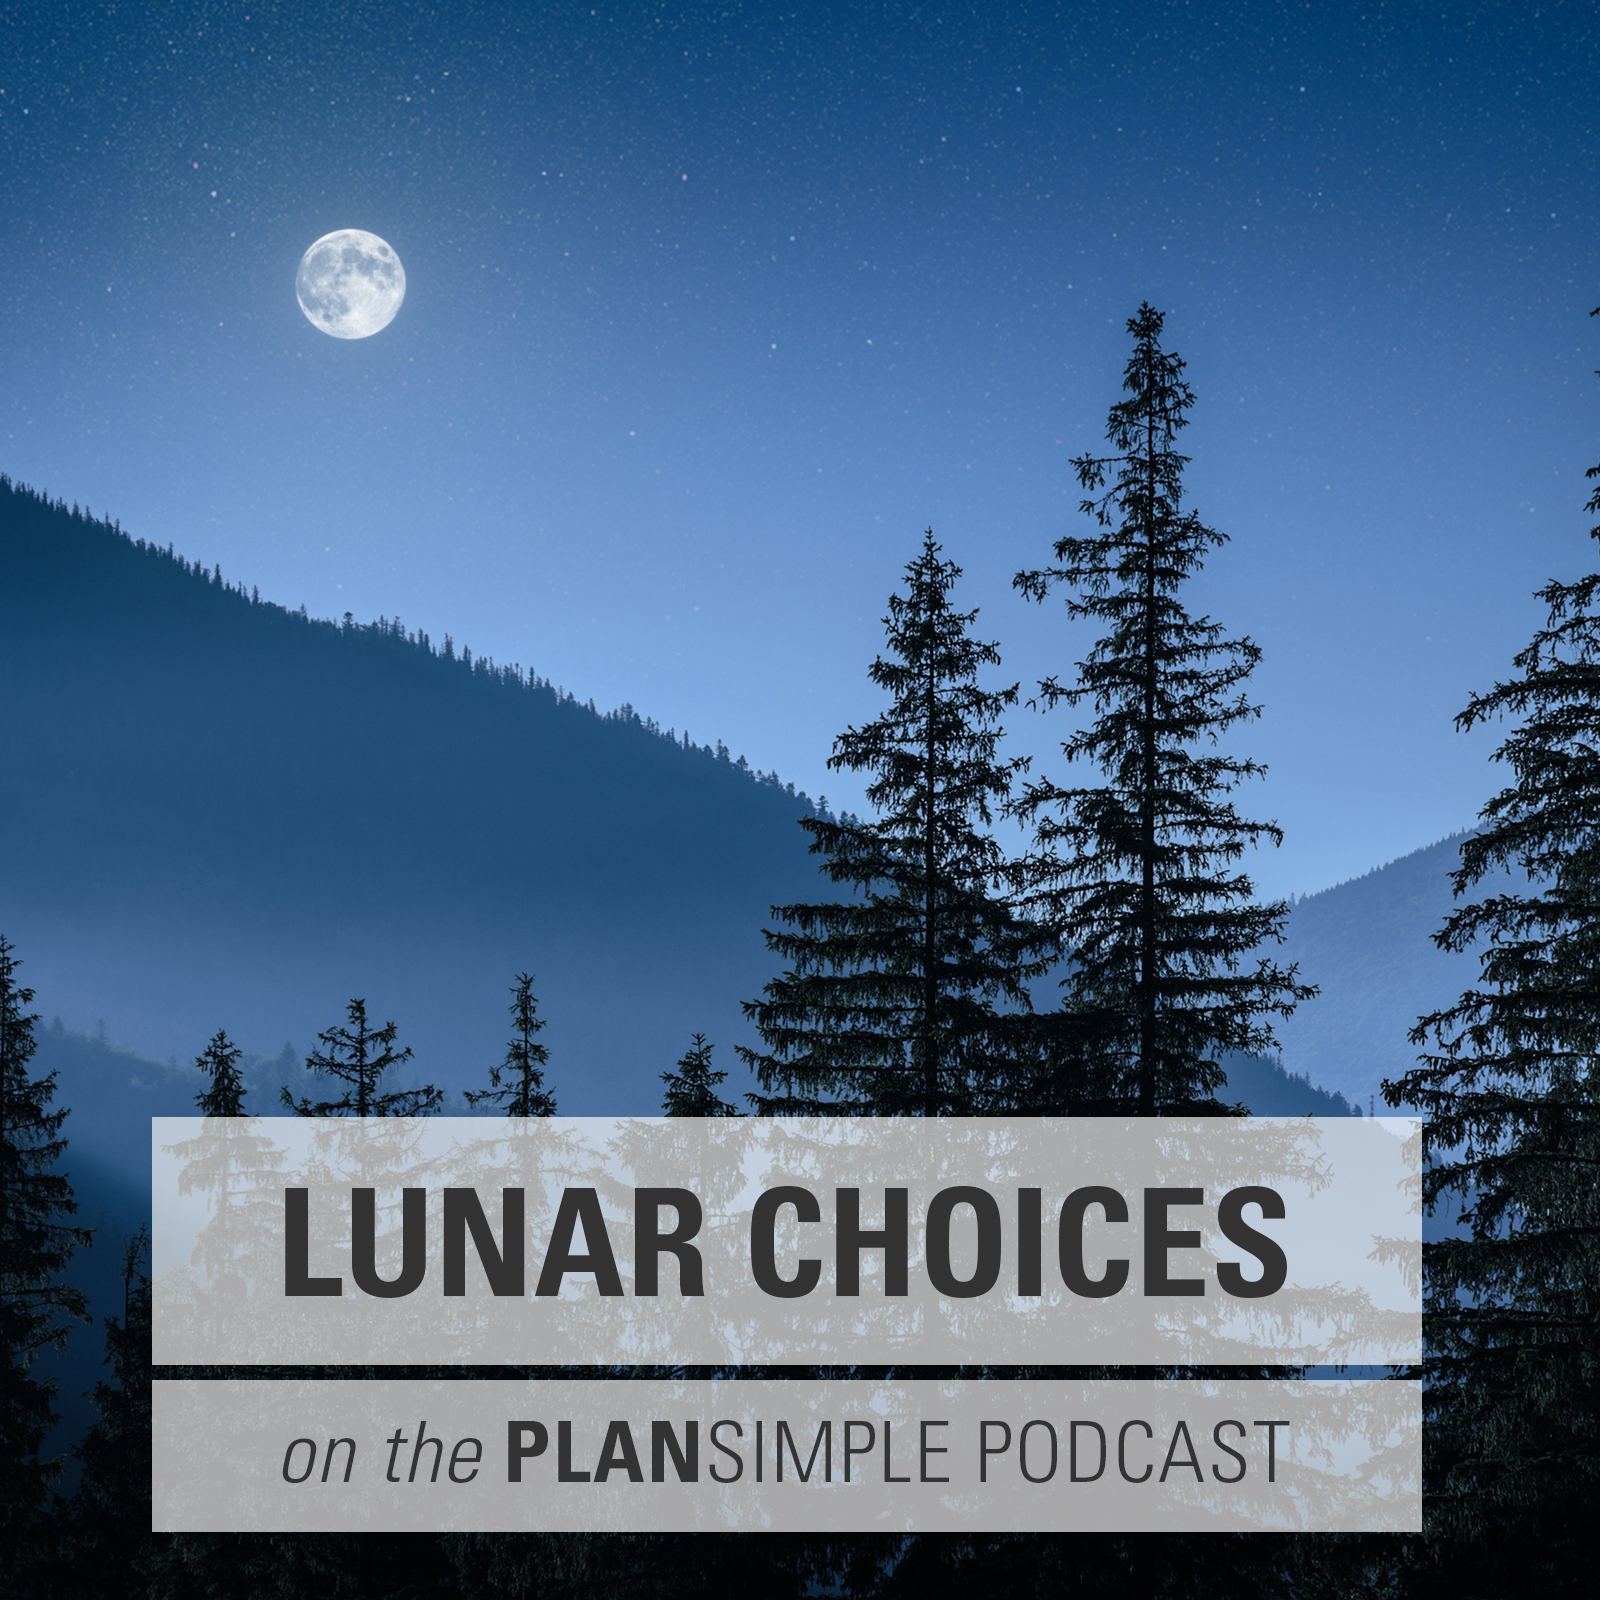 How to Utilize the Full Moon to Make Better Plans